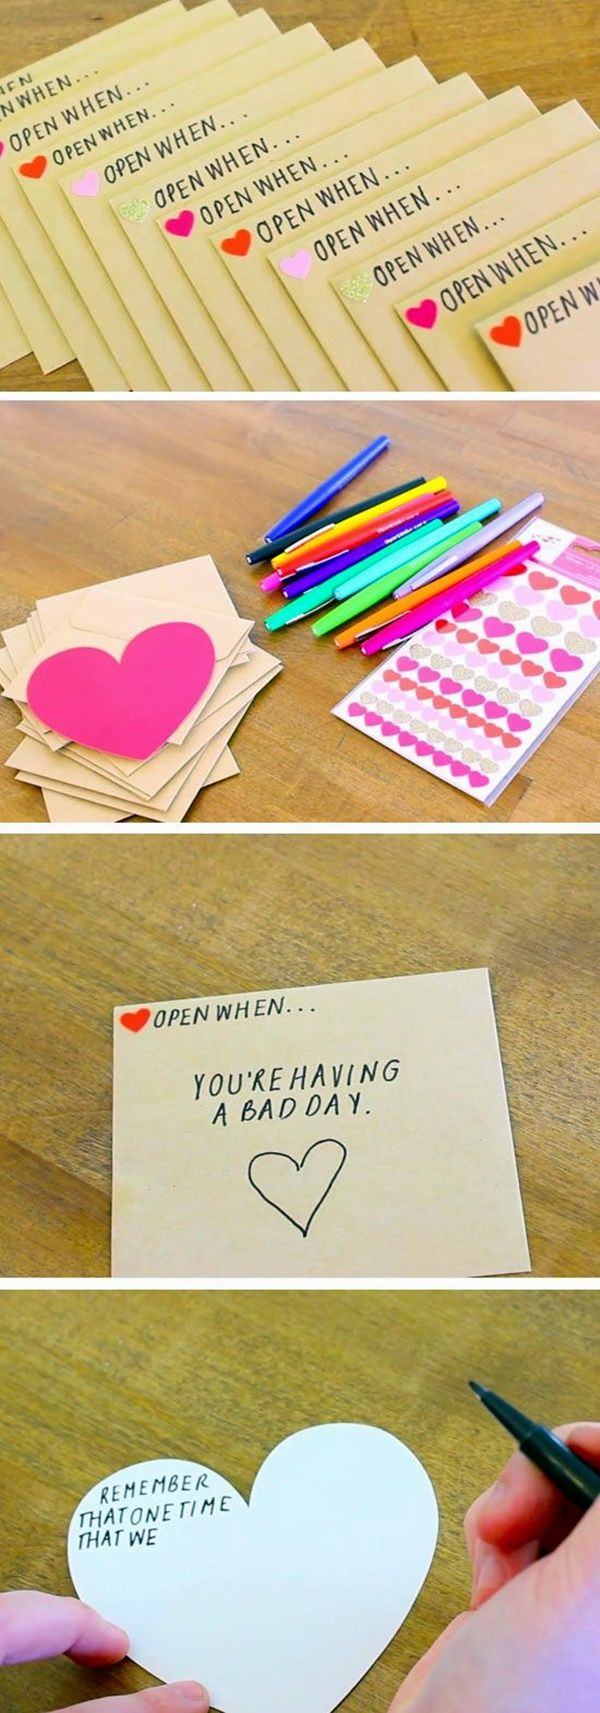 Cute Cheap Valentines Day Ideas
 101 Homemade Valentines Day Ideas for Him that re really